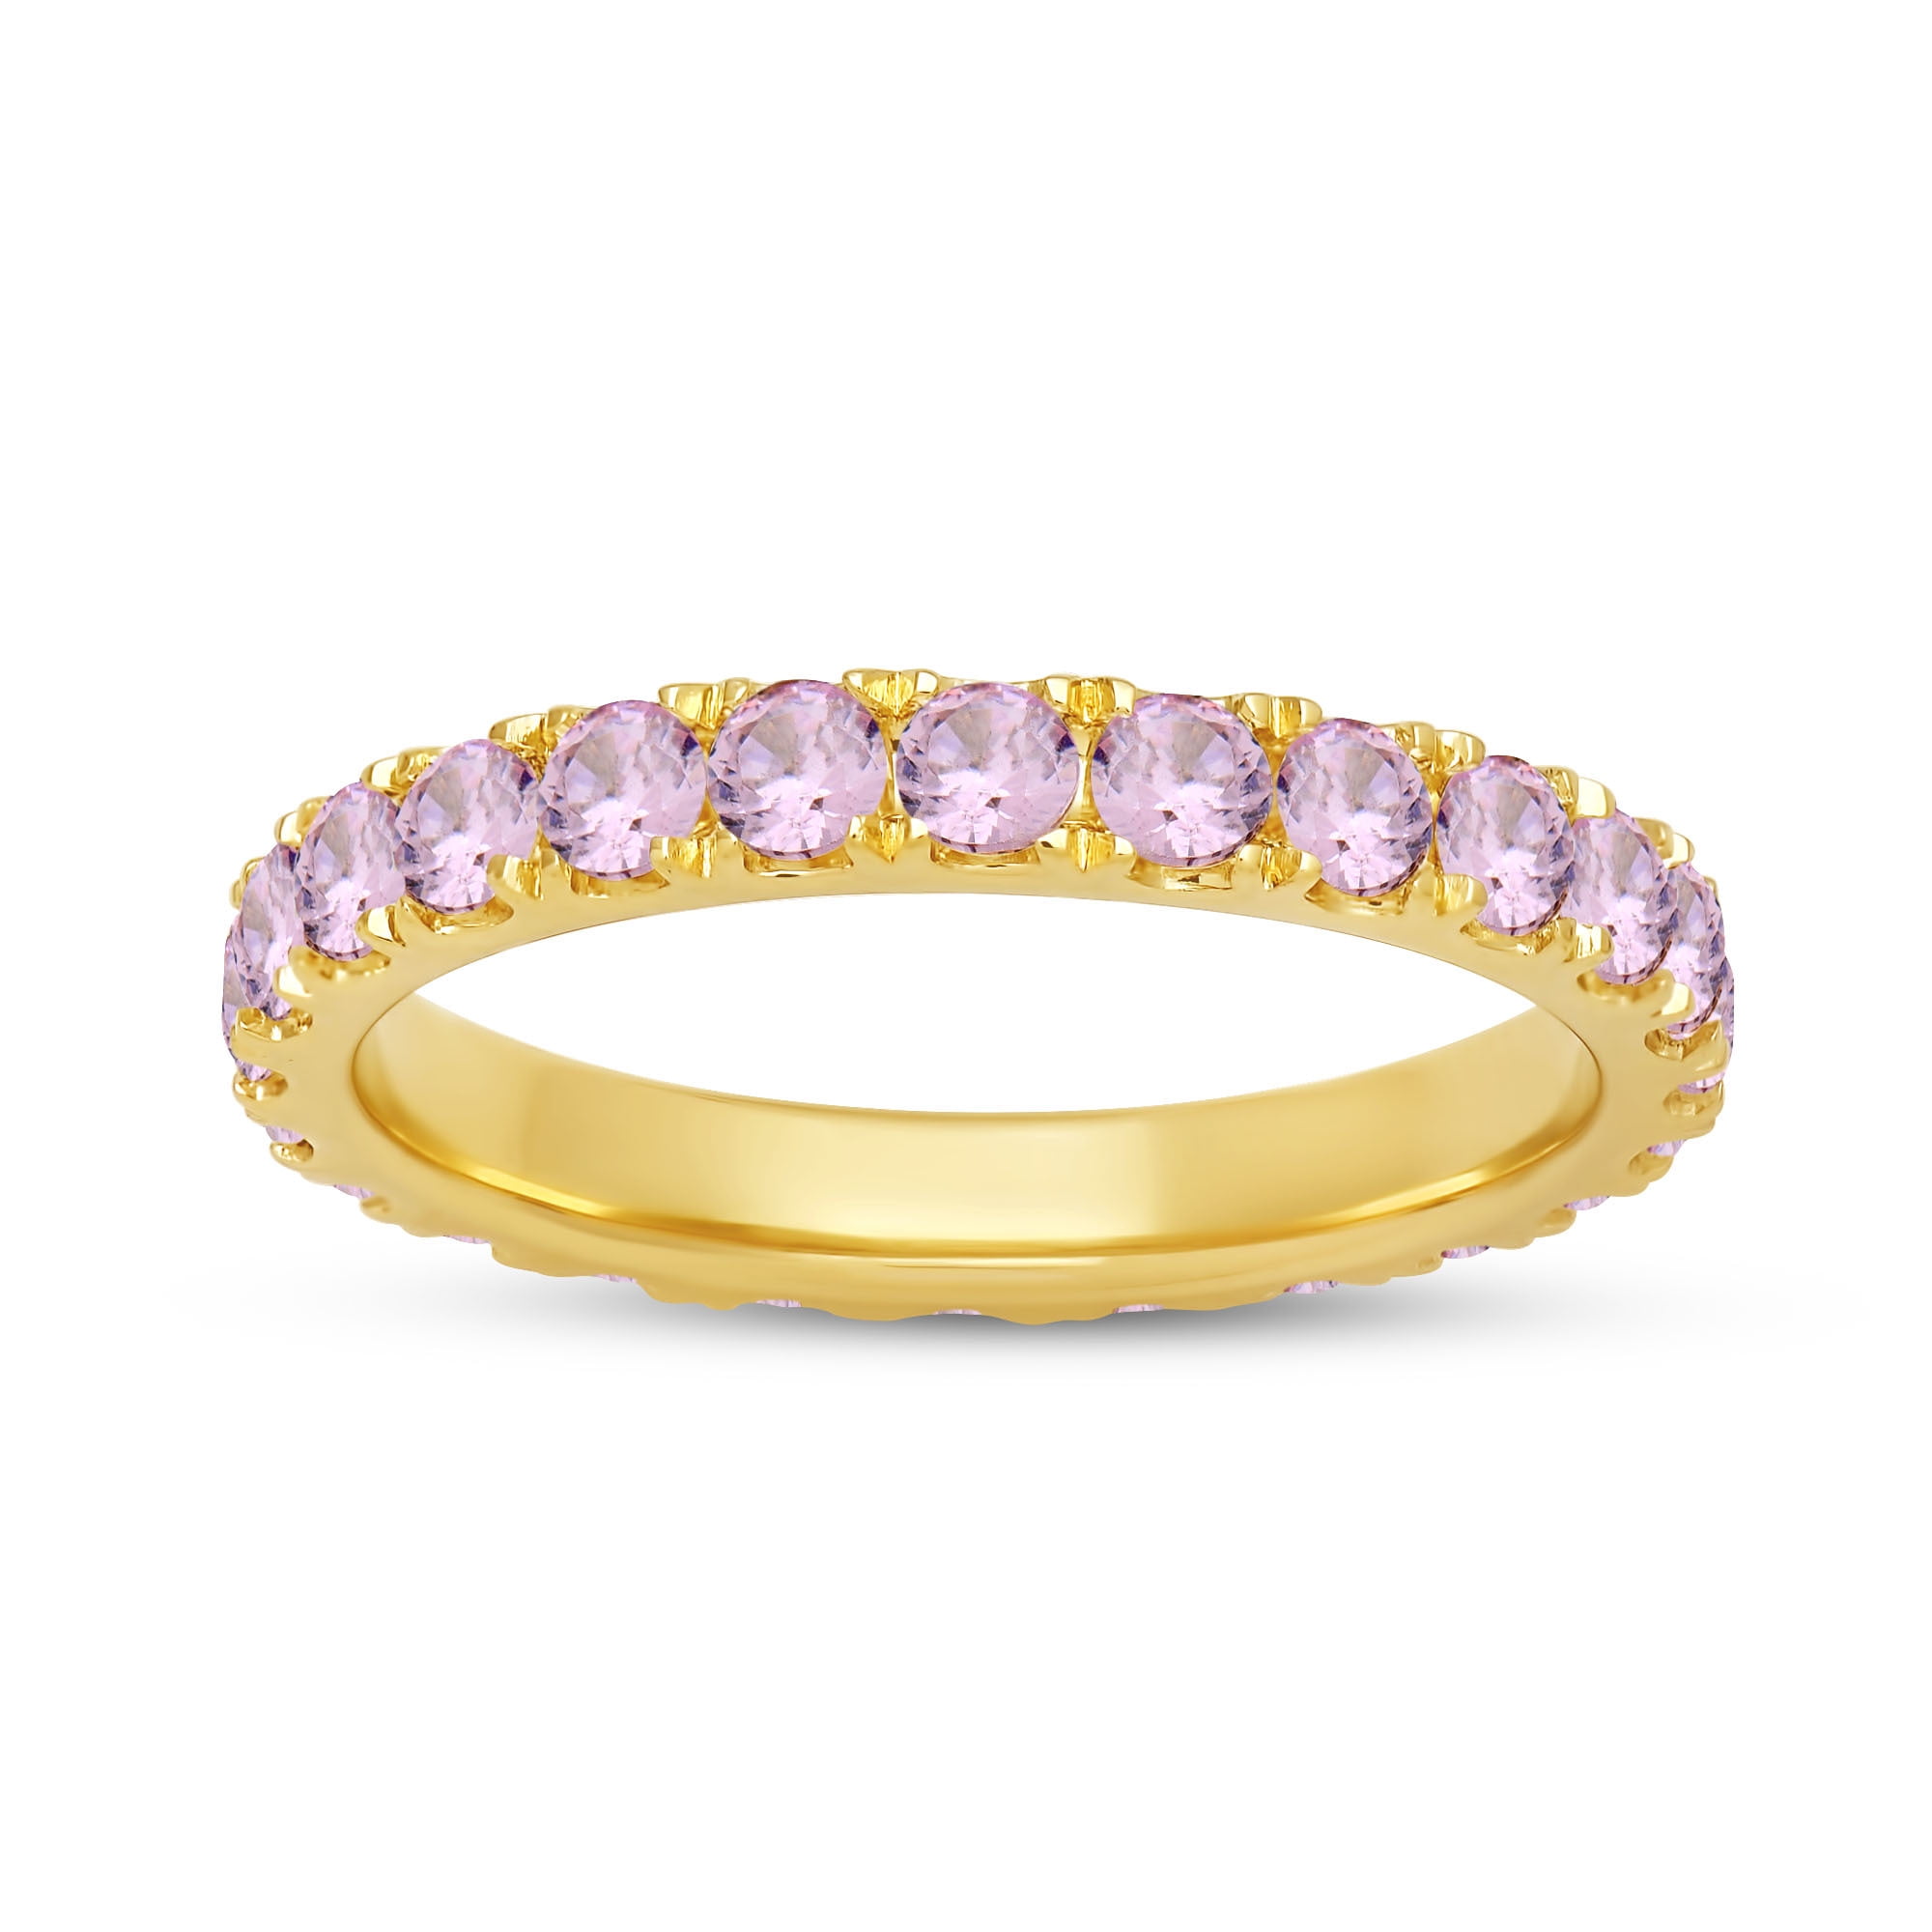 Details about   0.80Ct Round Cut Amethyst Half Eternity Wedding Band Ring 18K Rose Gold Finish 